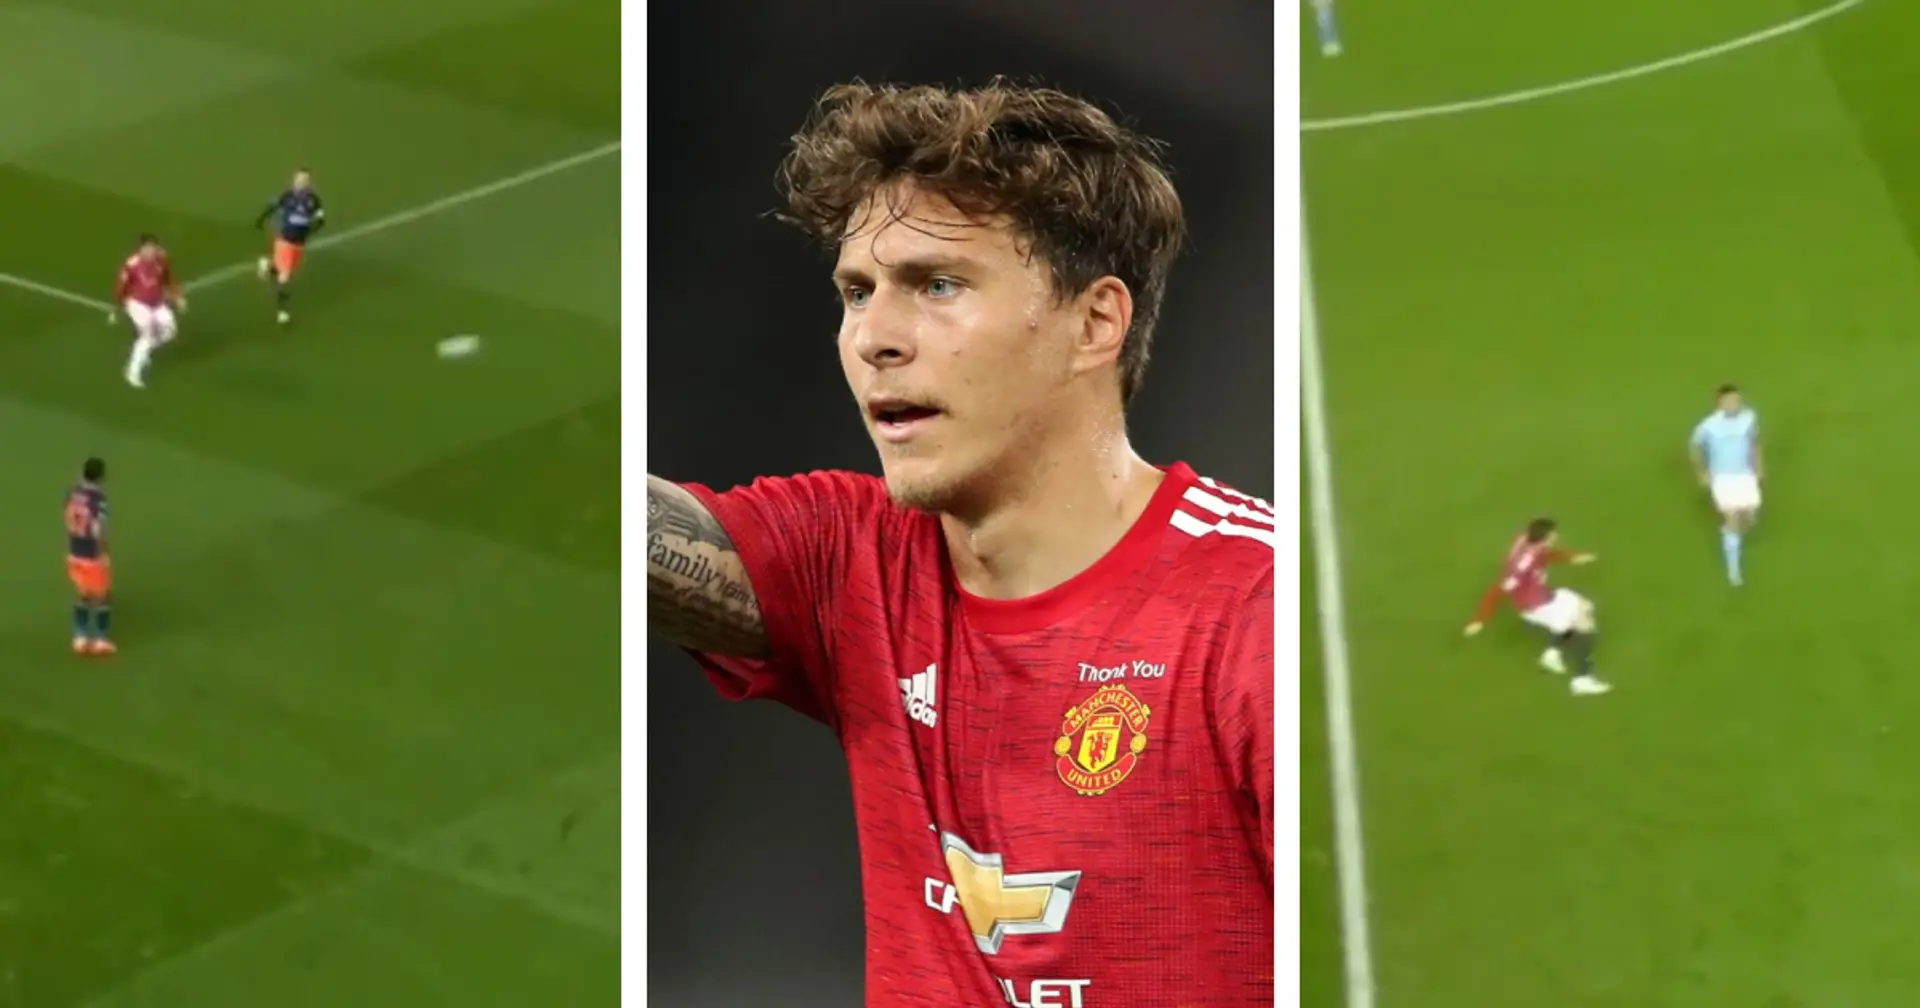 Pass master: 3 plays that show Victor Lindelof's brilliance at long passes